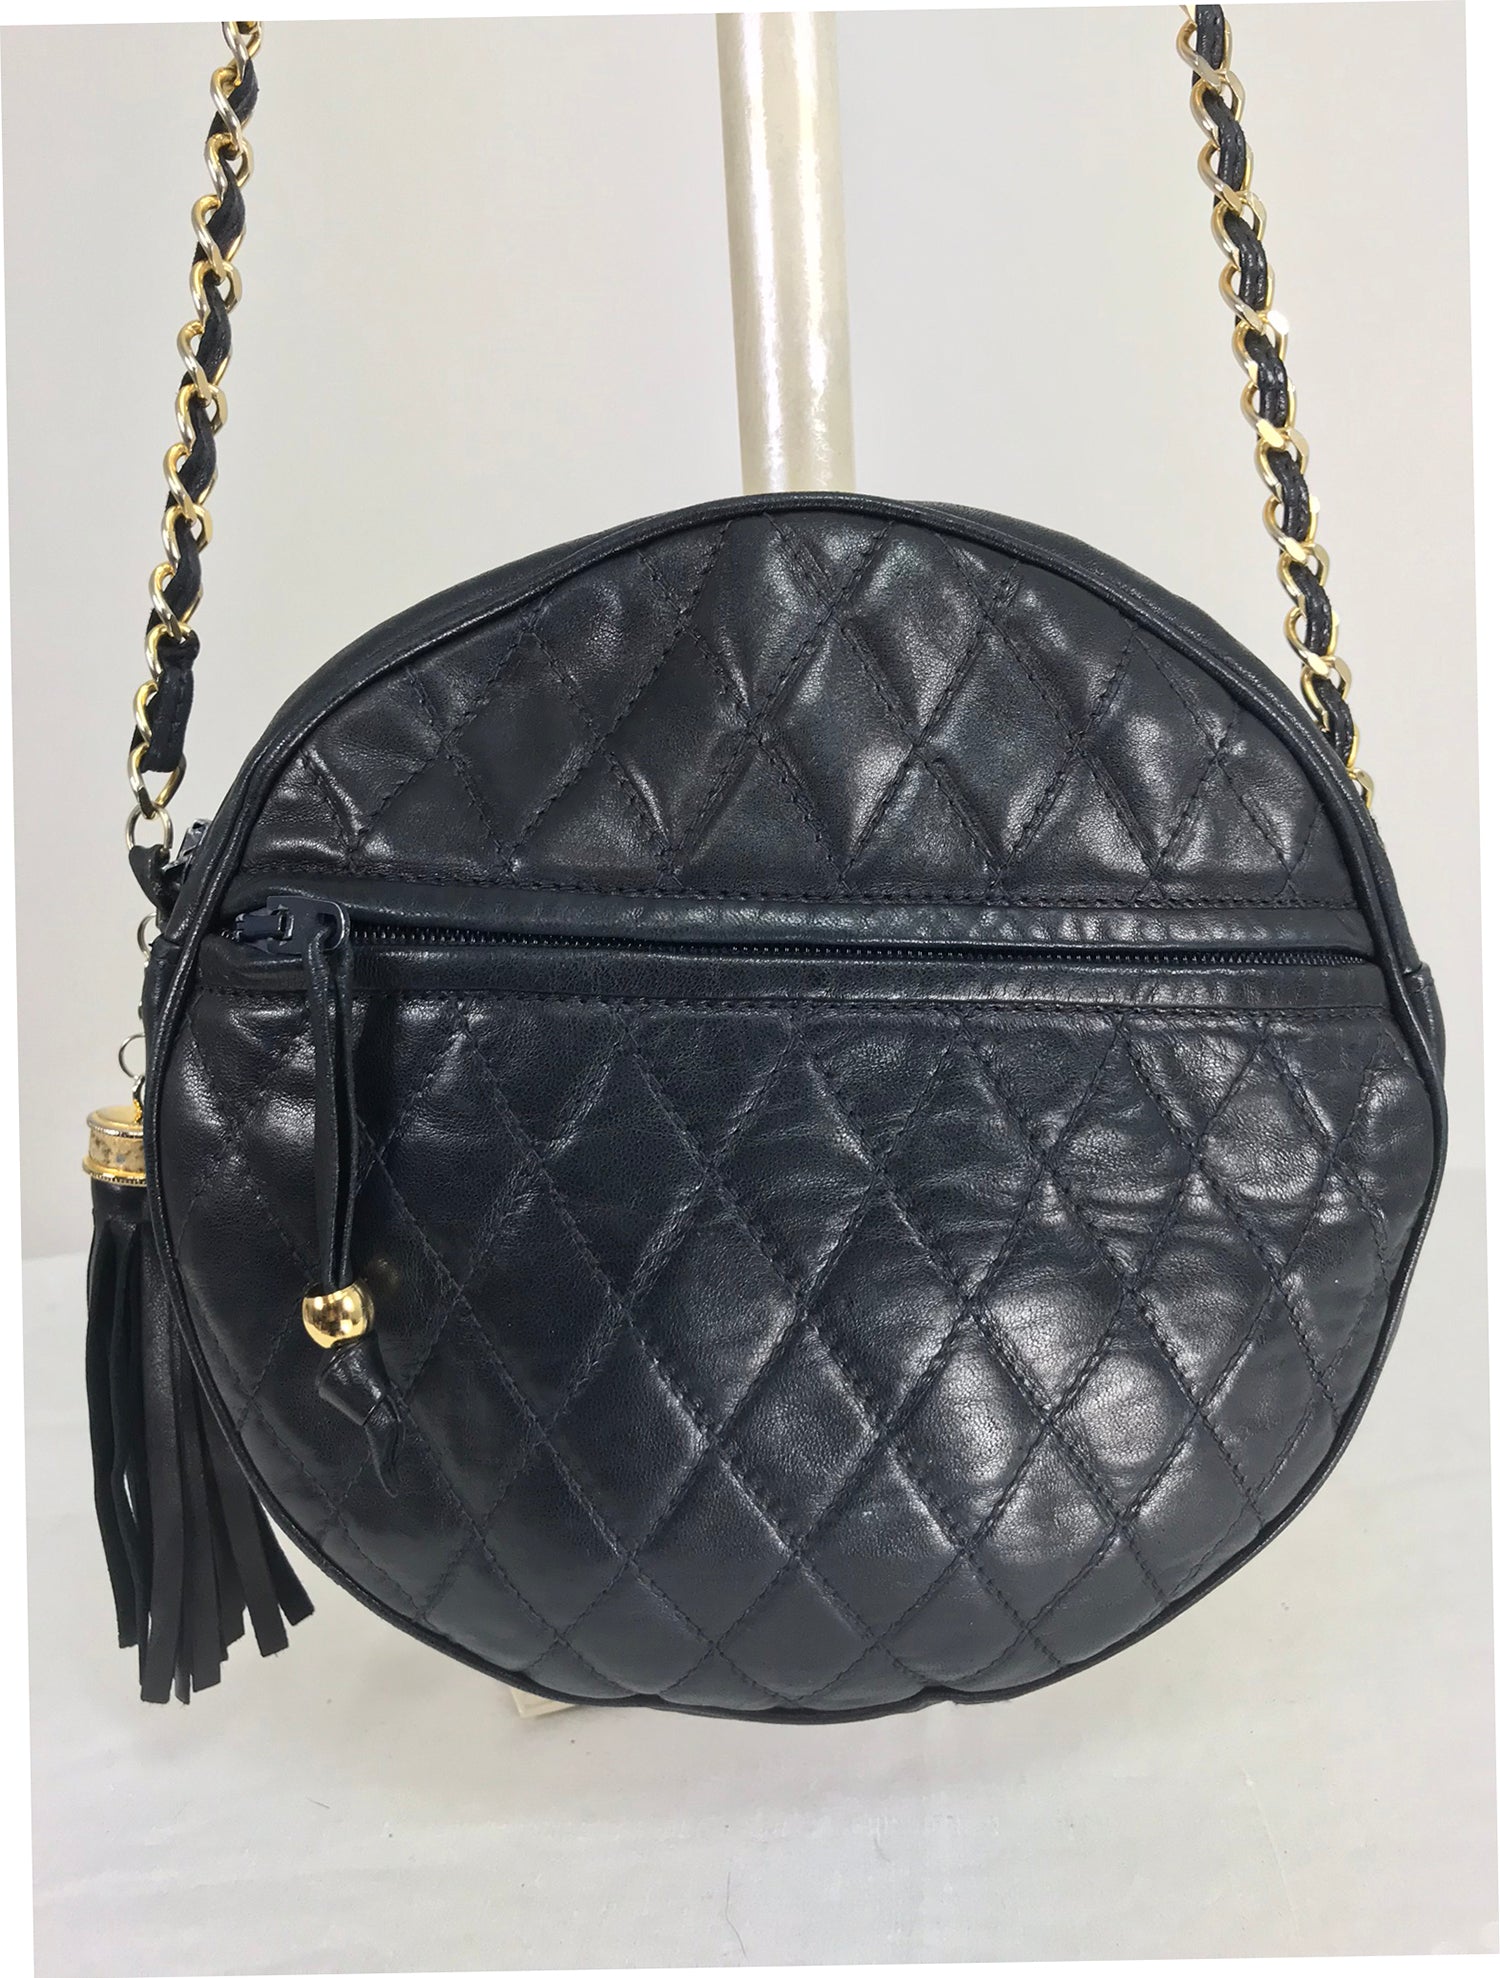 Vintage Chanel Quilted Black Lambskin Leather Tote Bag from 1980s